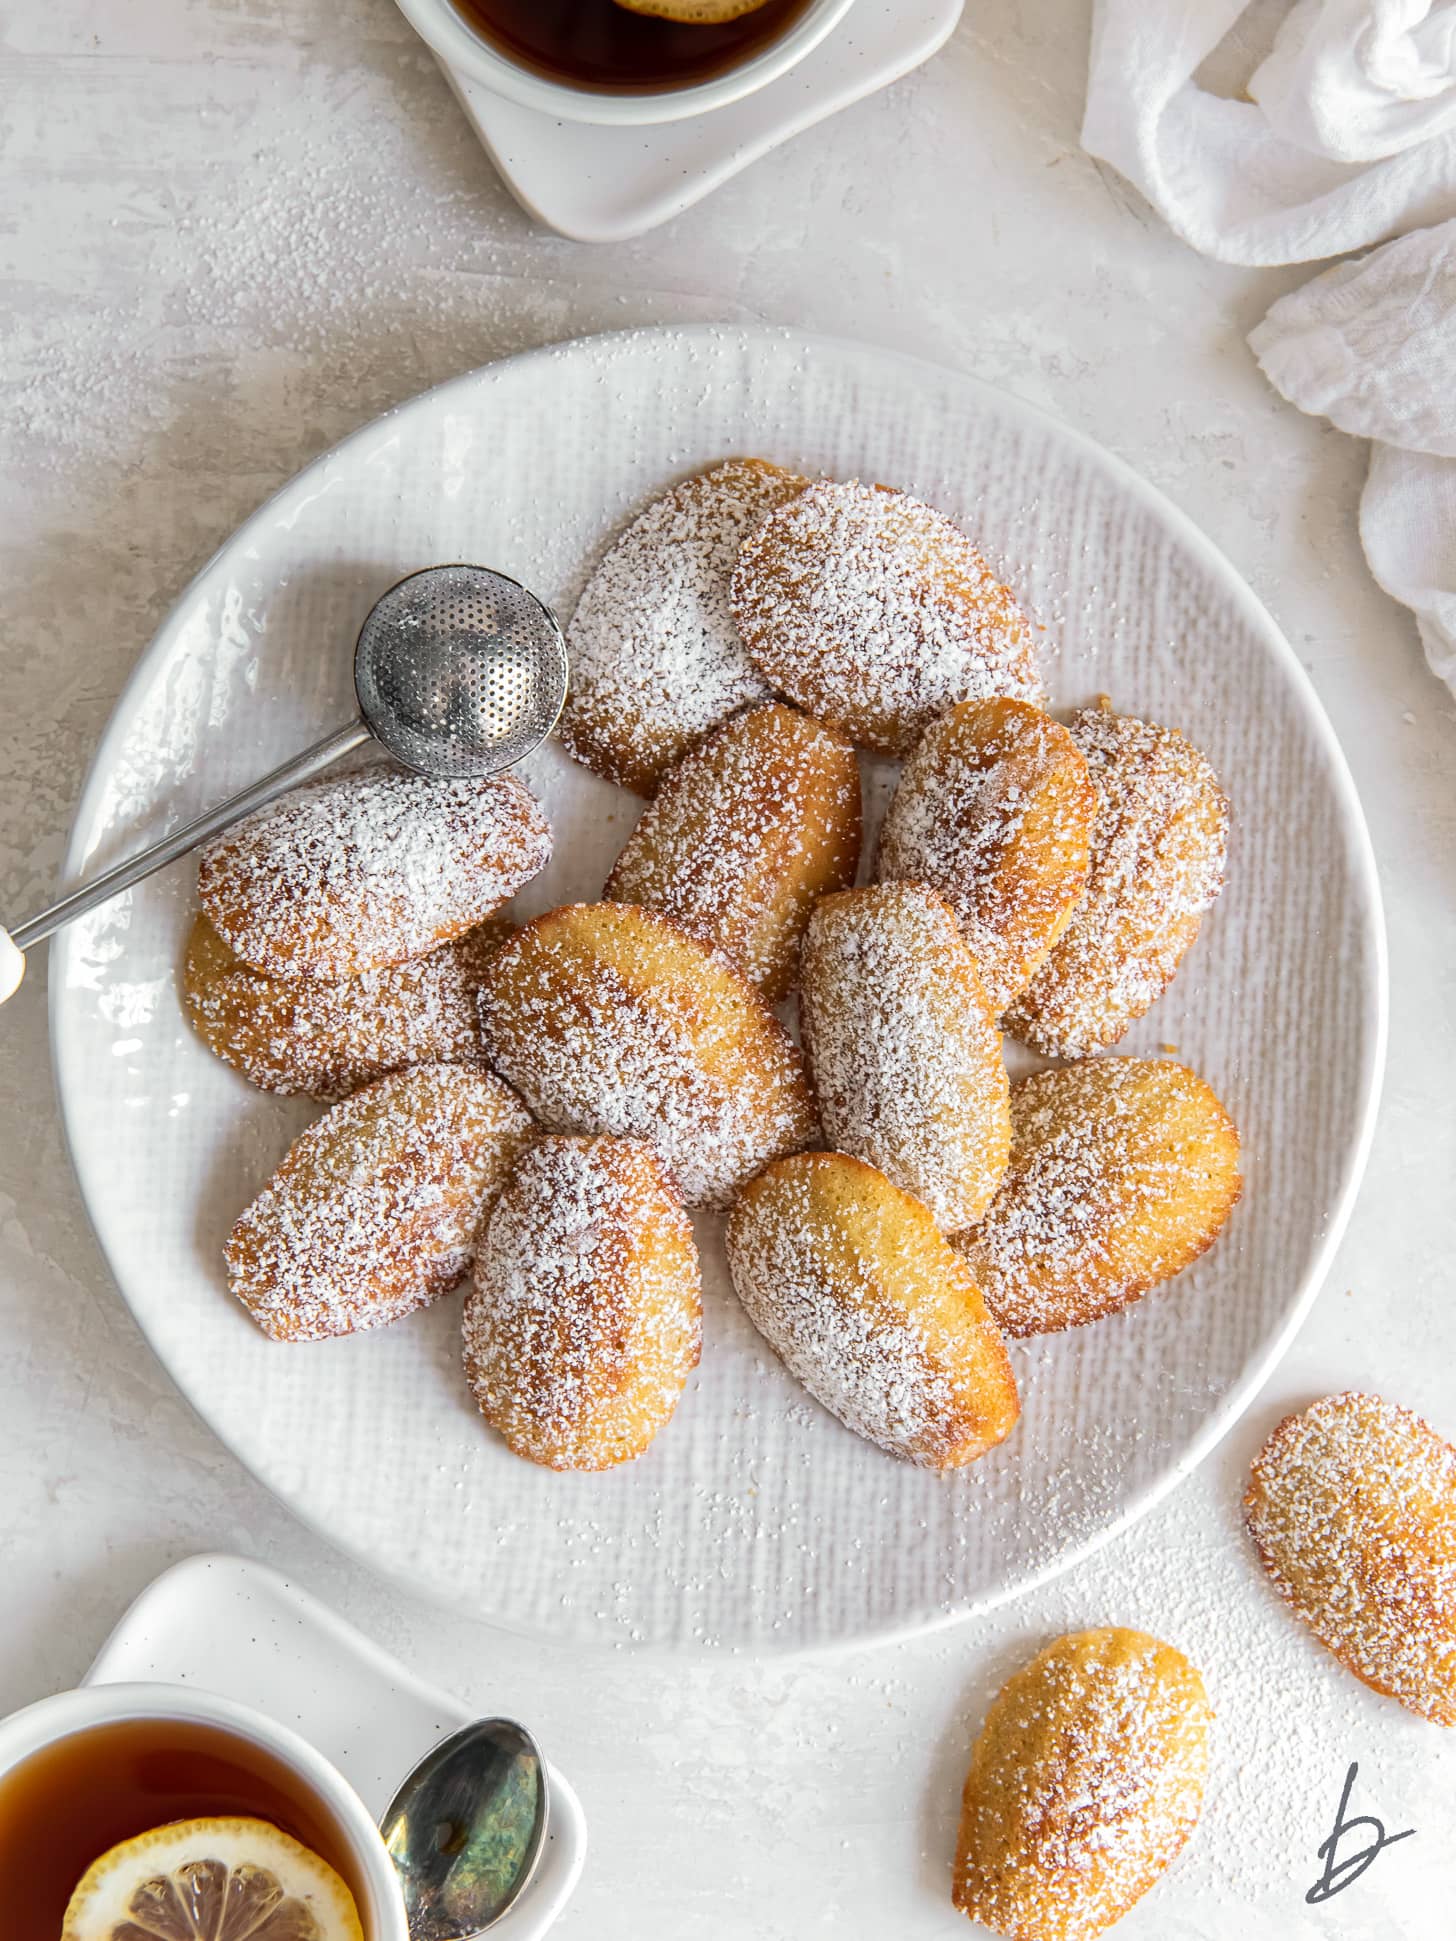 madeleine cookies dusted with confectioners' sugar on a plate next to mug of tea.